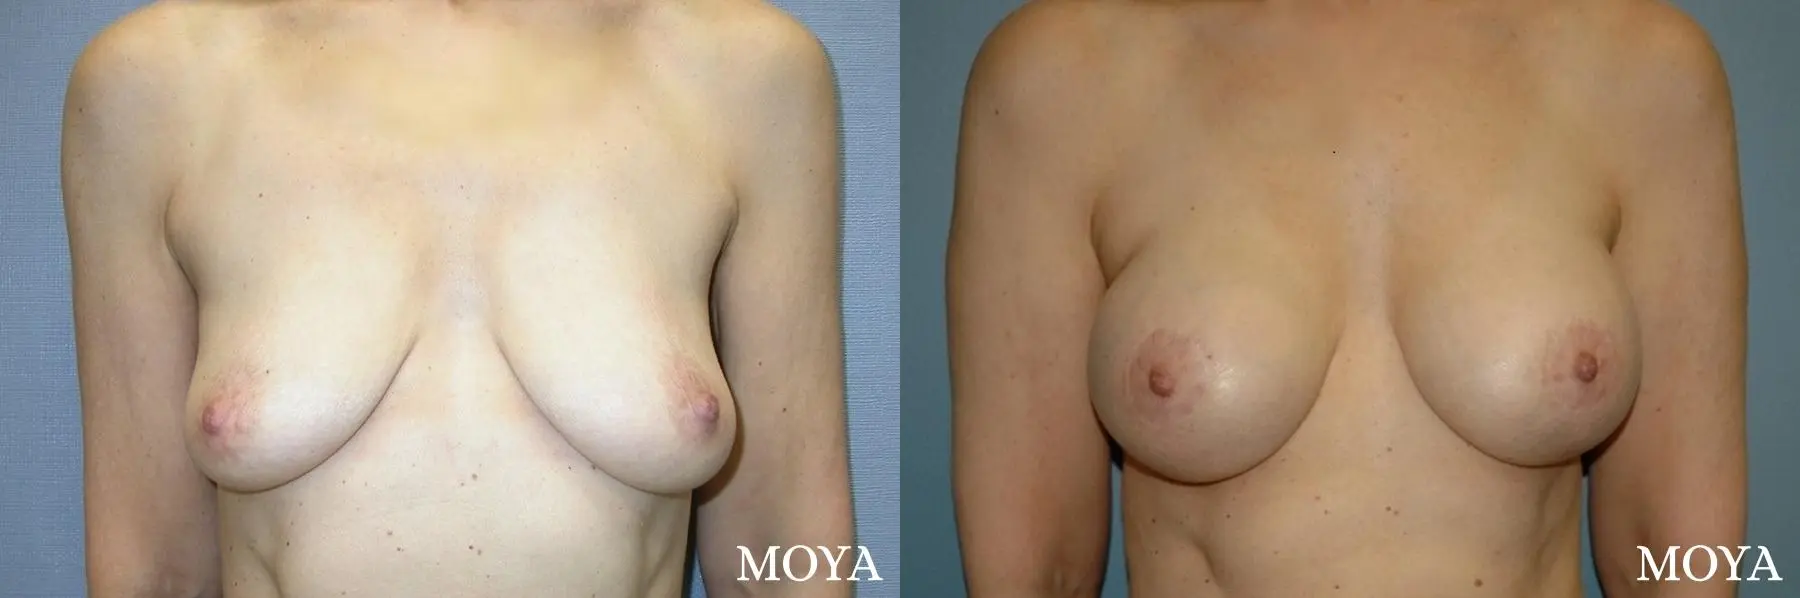 Breast Augmentation With Lift: Patient 3 - Before and After  